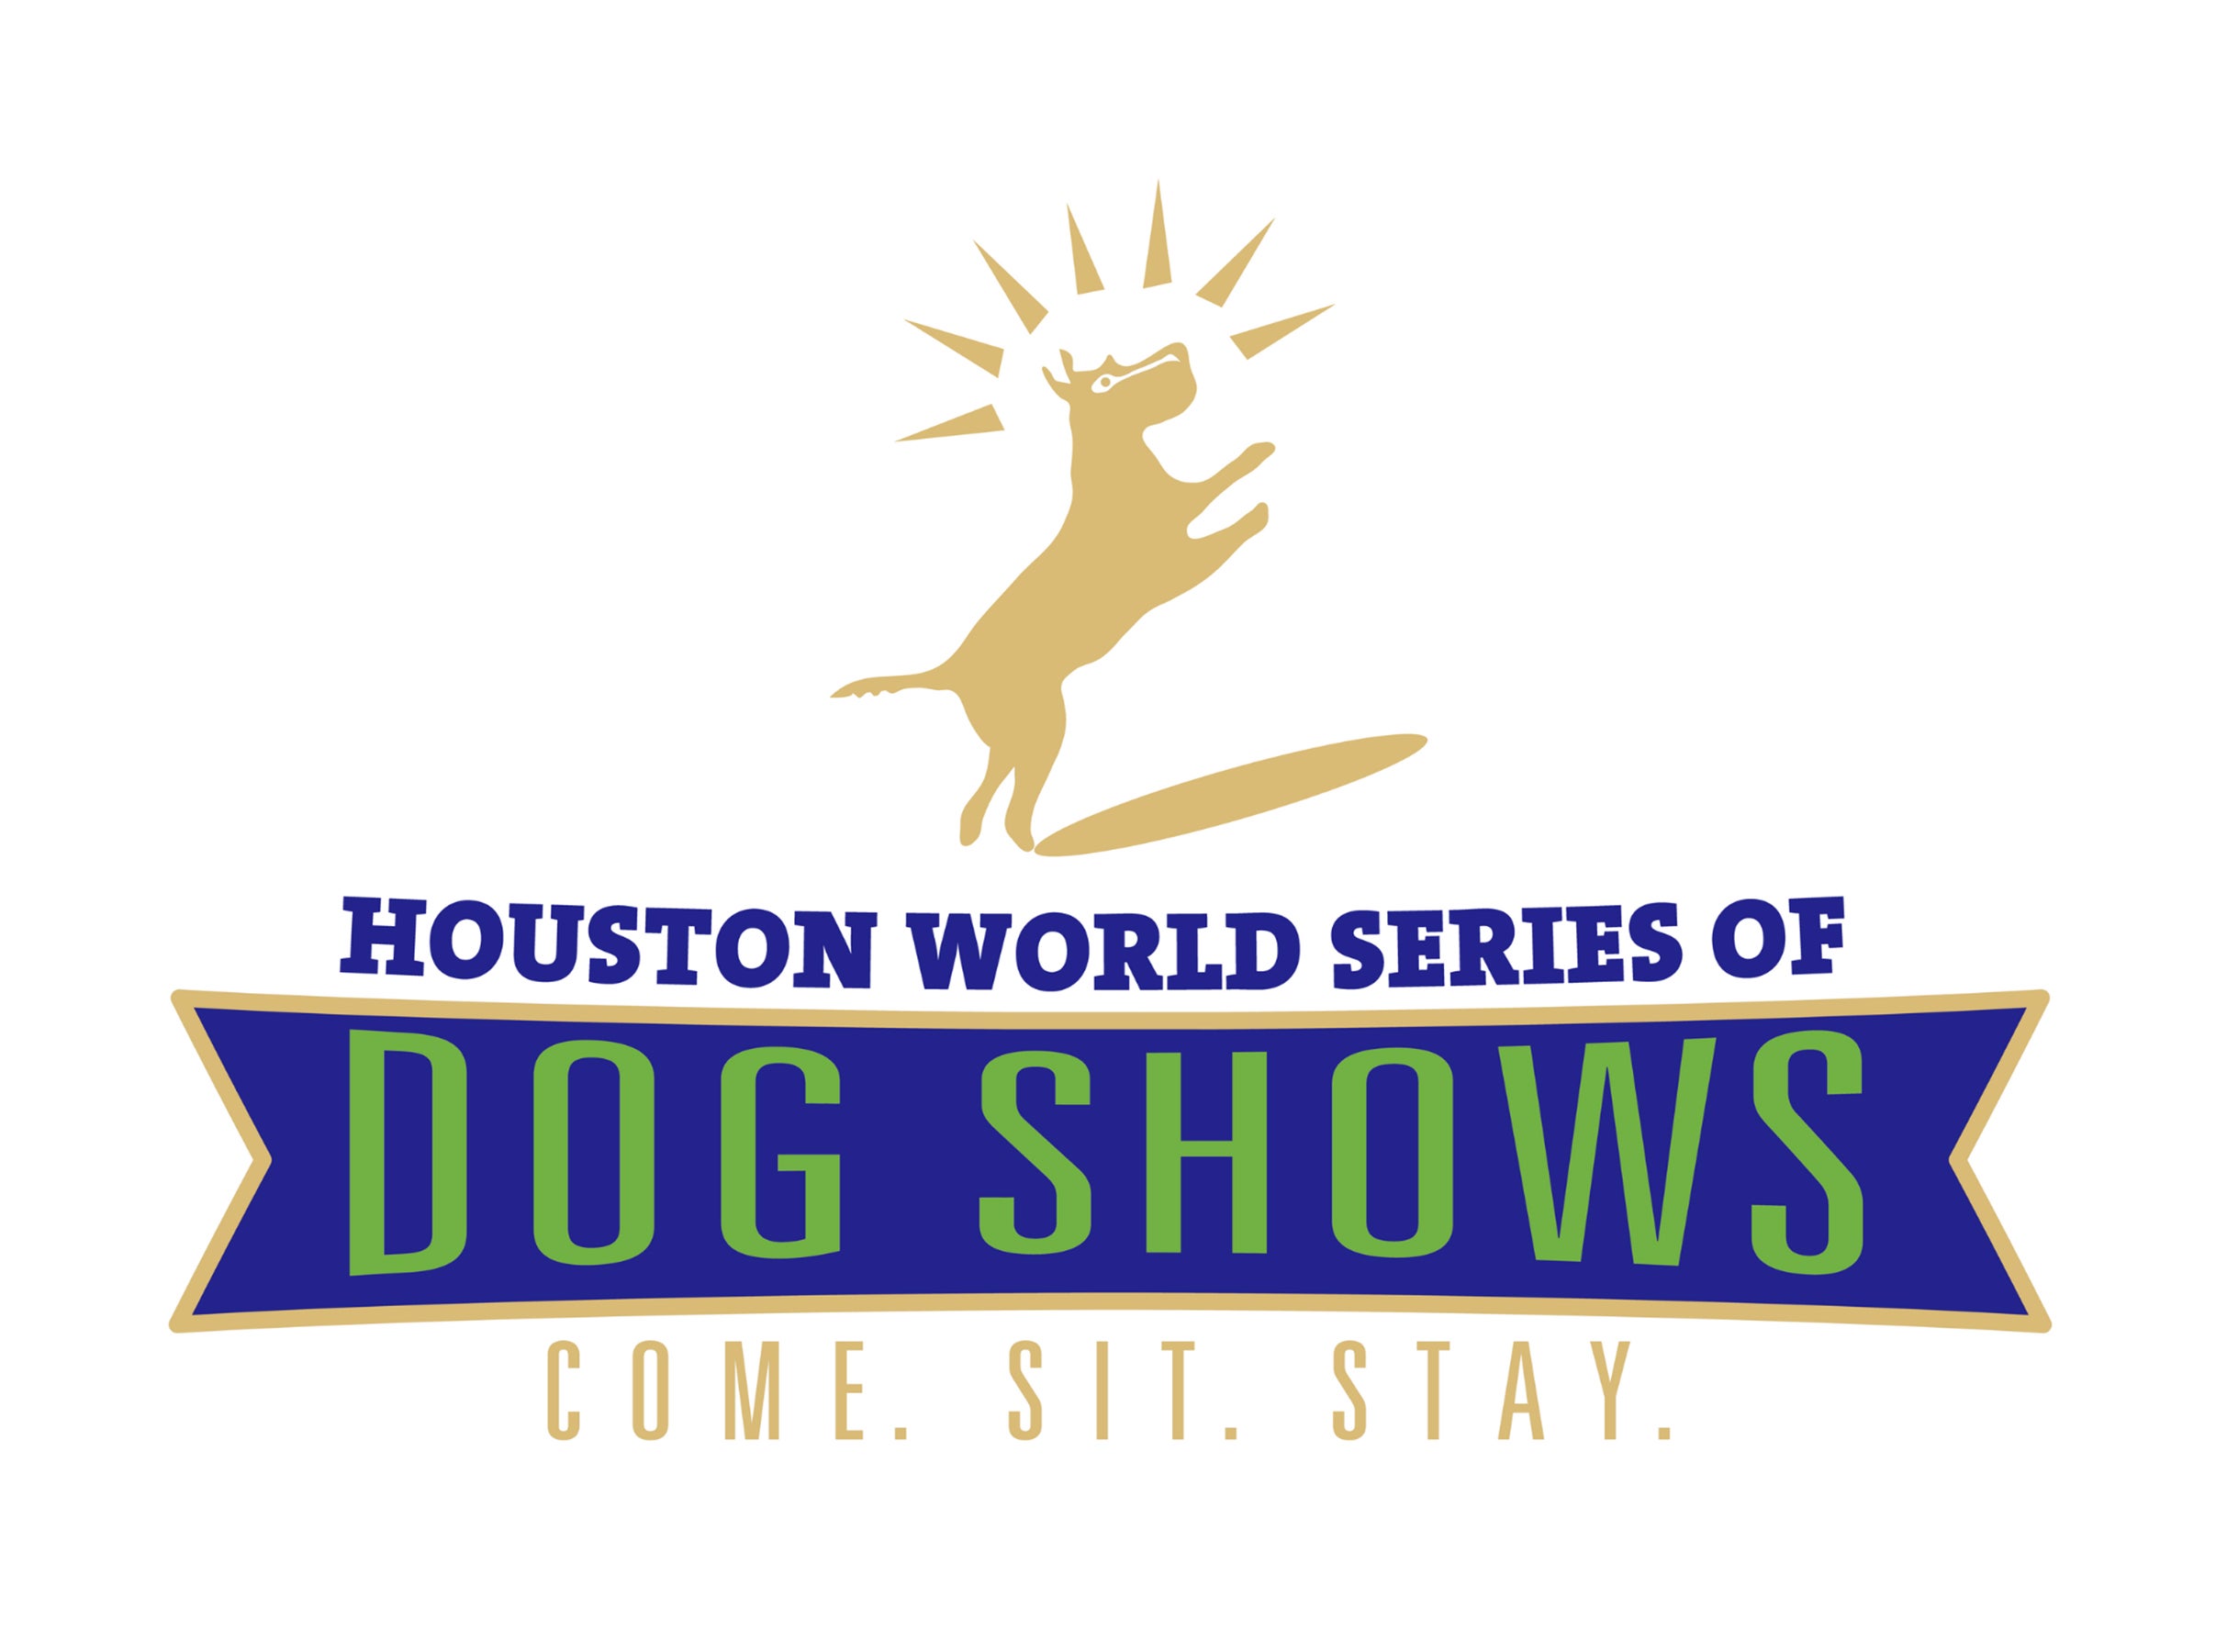 Houston World Series of Dog Shows Weekend Single-Day Pass in Houston promo photo for Gillman Subaru presale offer code